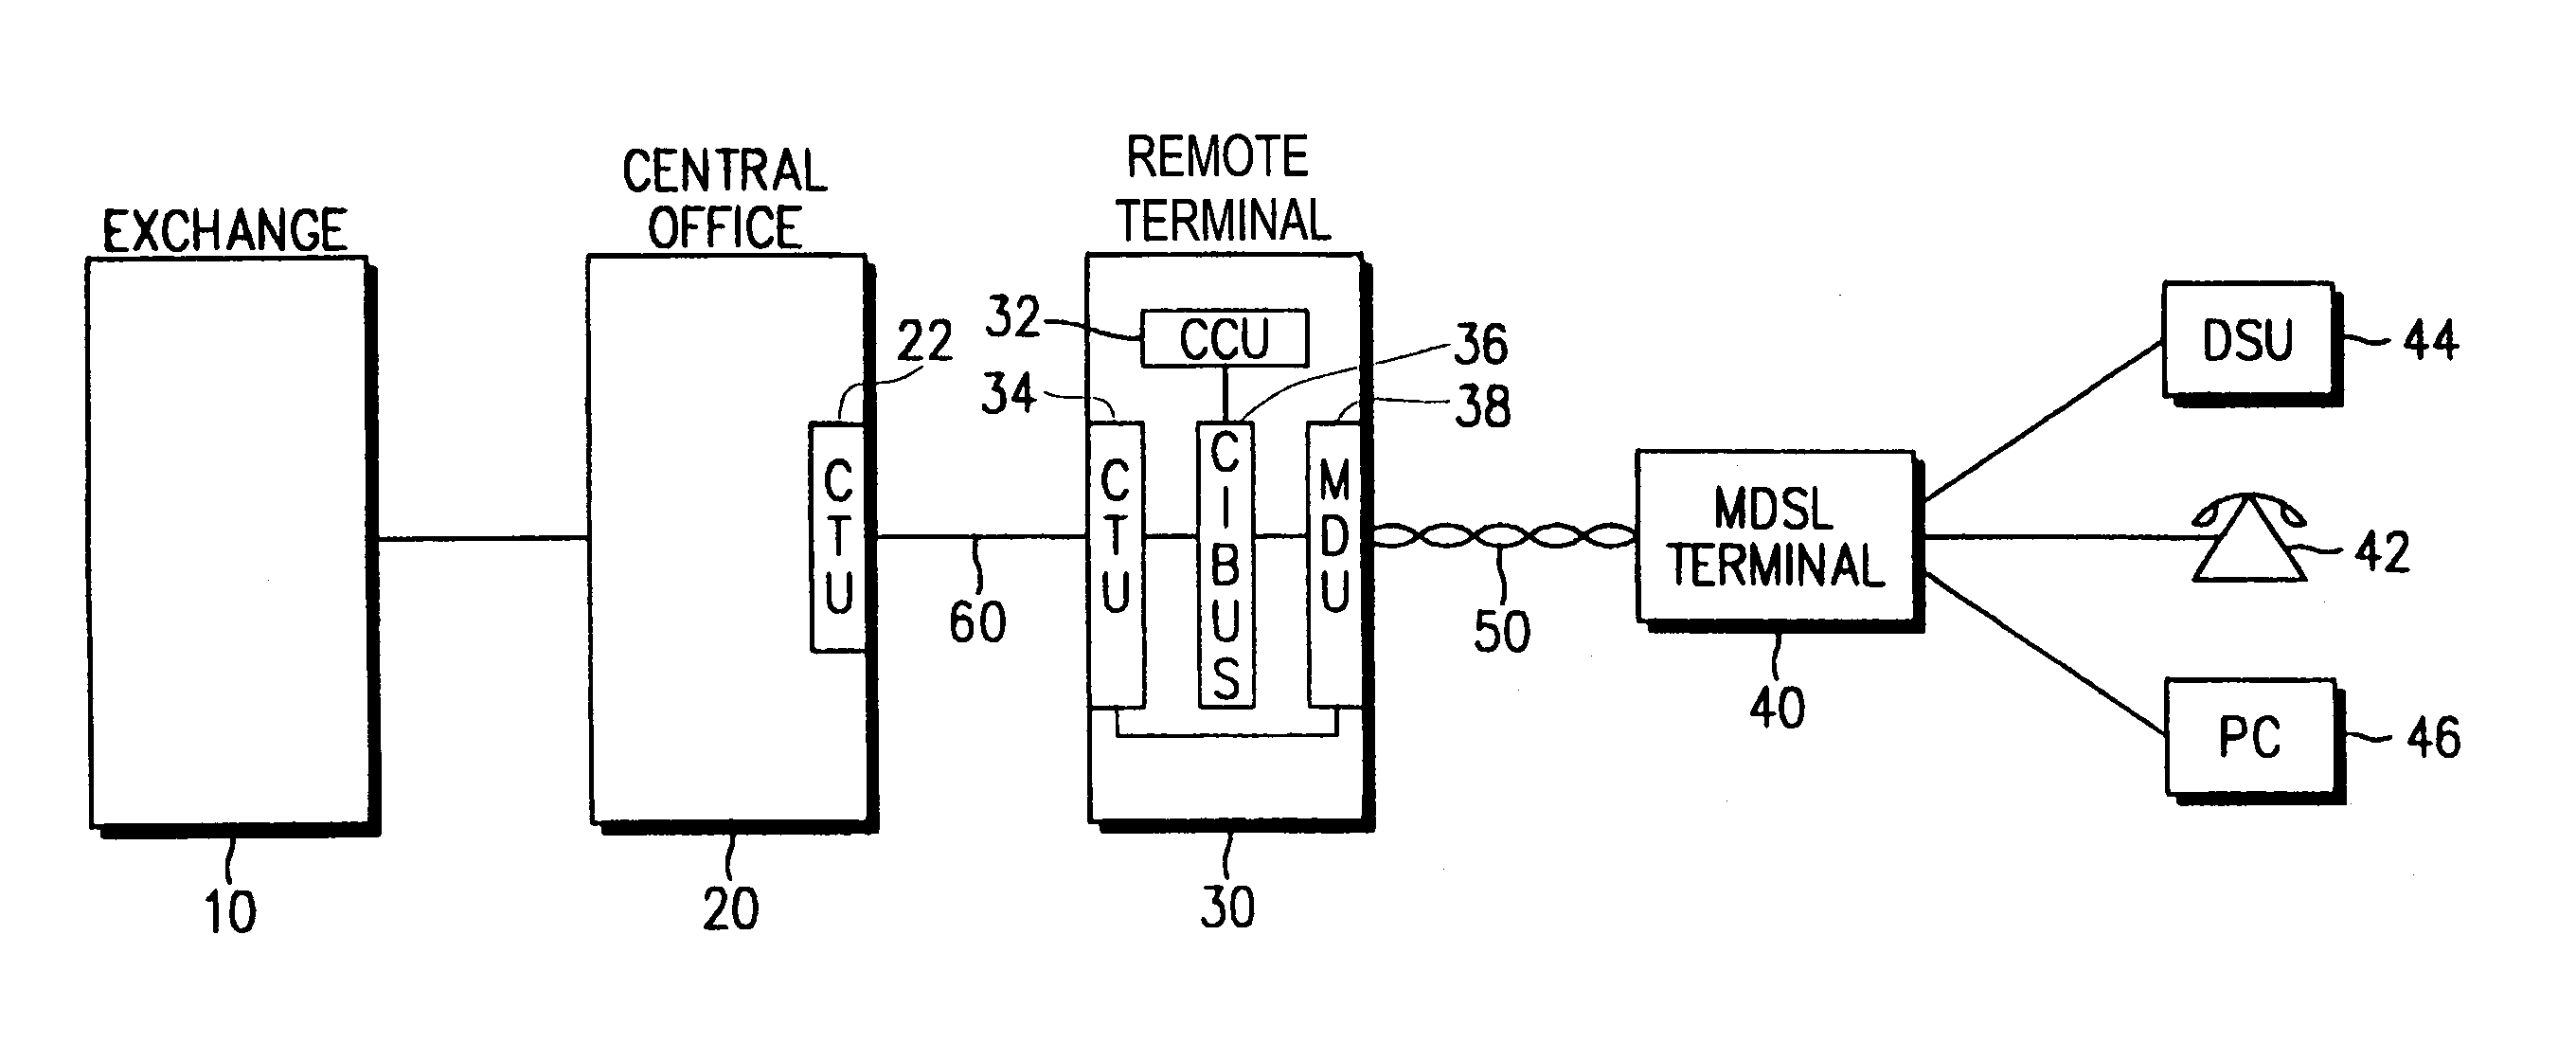 Method for providing high-speed data service and voice service